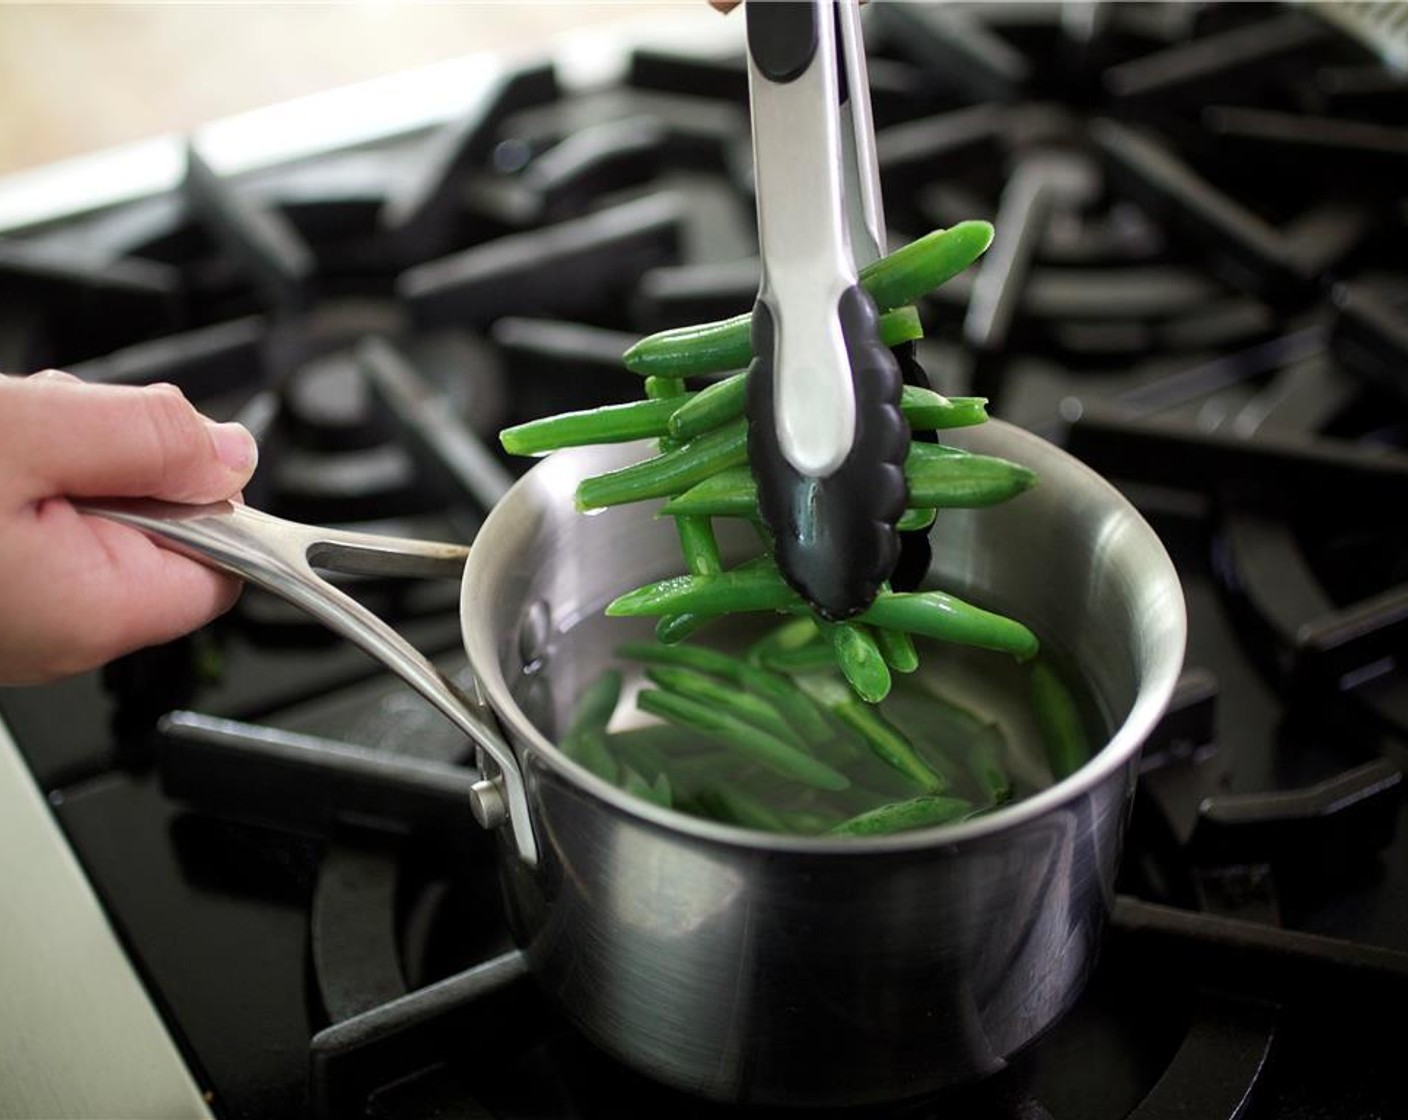 step 12 Trim the ends off of the green beans and add to saucepan once water is boiling. Cook for two minutes.